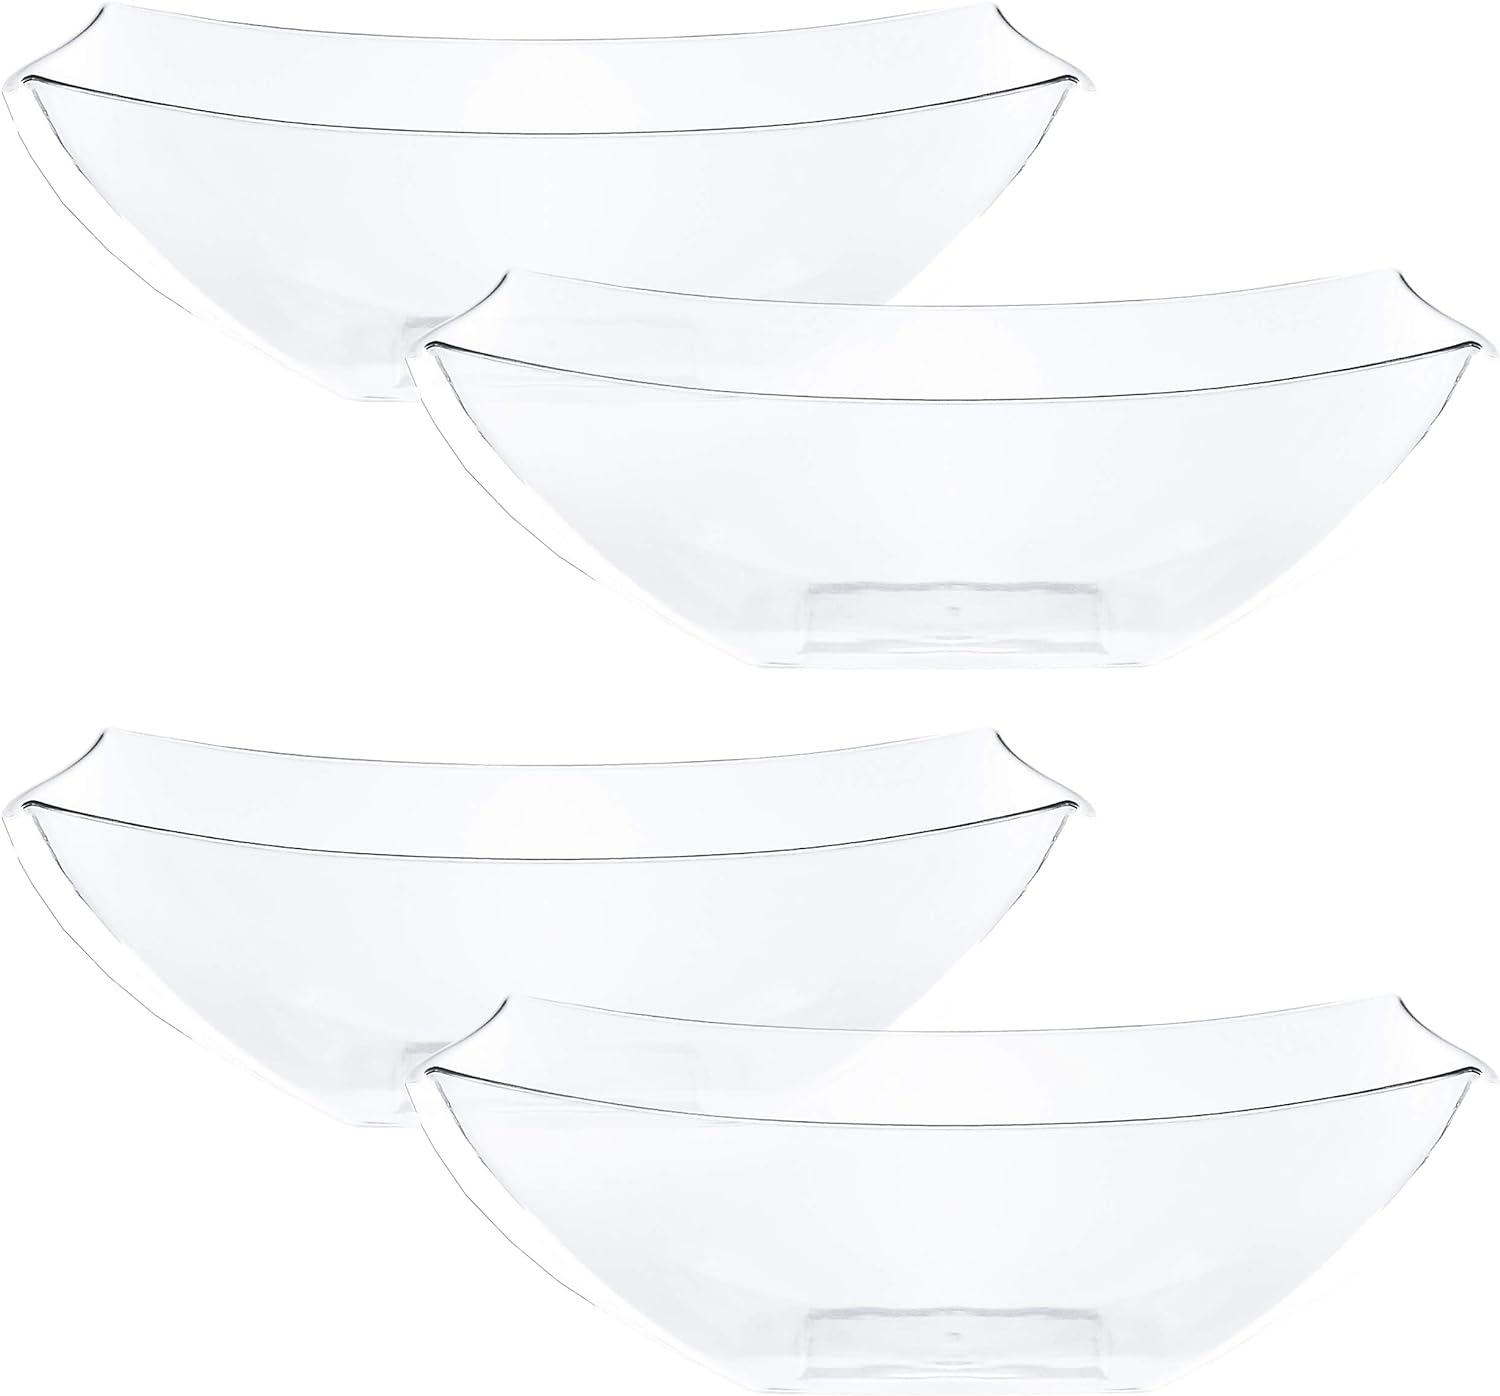 PLASTICPRO Disposable 64 ounce Square Serving Bowls, Party Snack or Salad Bowl, Large Plastic Crystal Clear Pack of 4